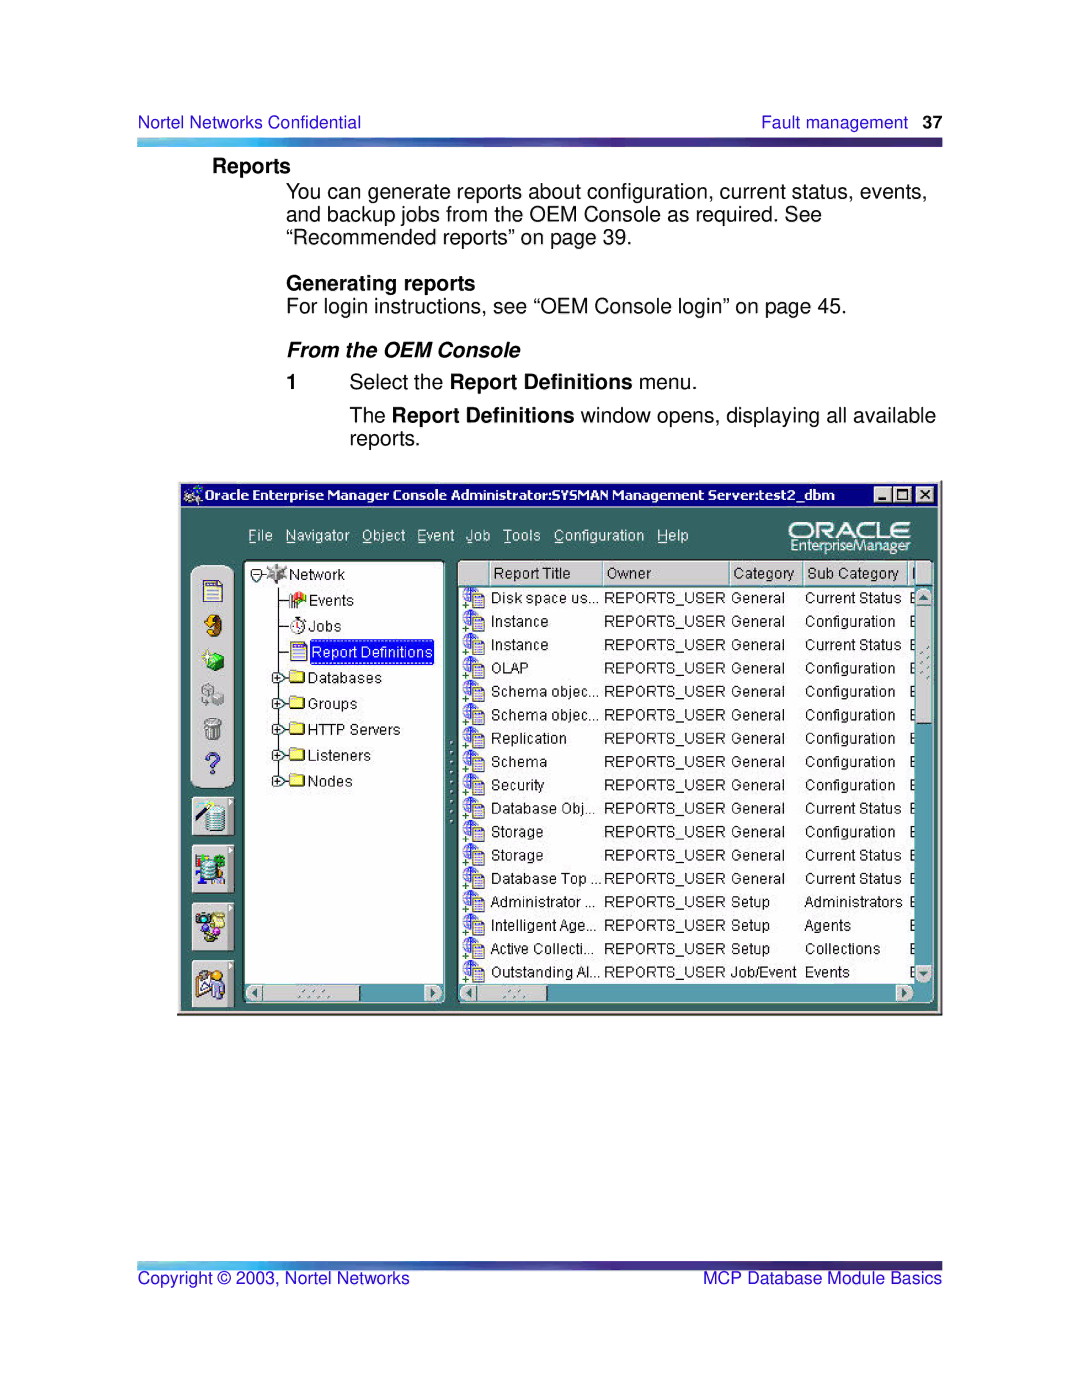 Nortel Networks Standard MCP 1.1 FP1 (02.02) manual Reports, Generating reports, Select the Report Definitions menu 